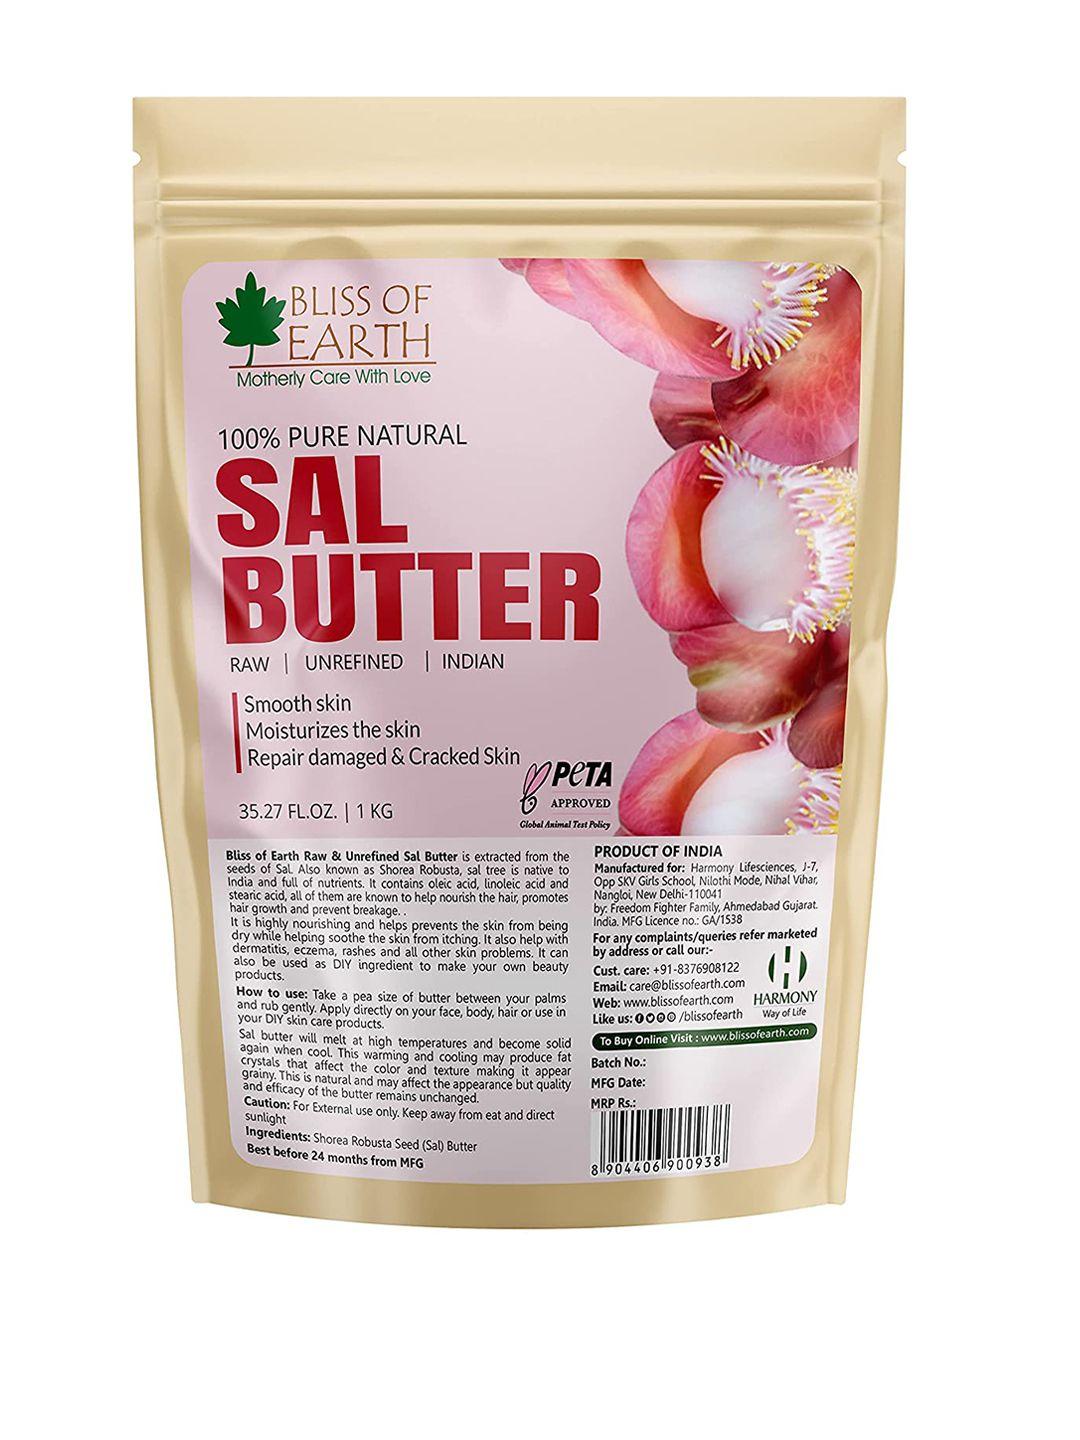 bliss of earth 100% organic raw & unrefined indian sal butter to moisturize the skin - 1kg